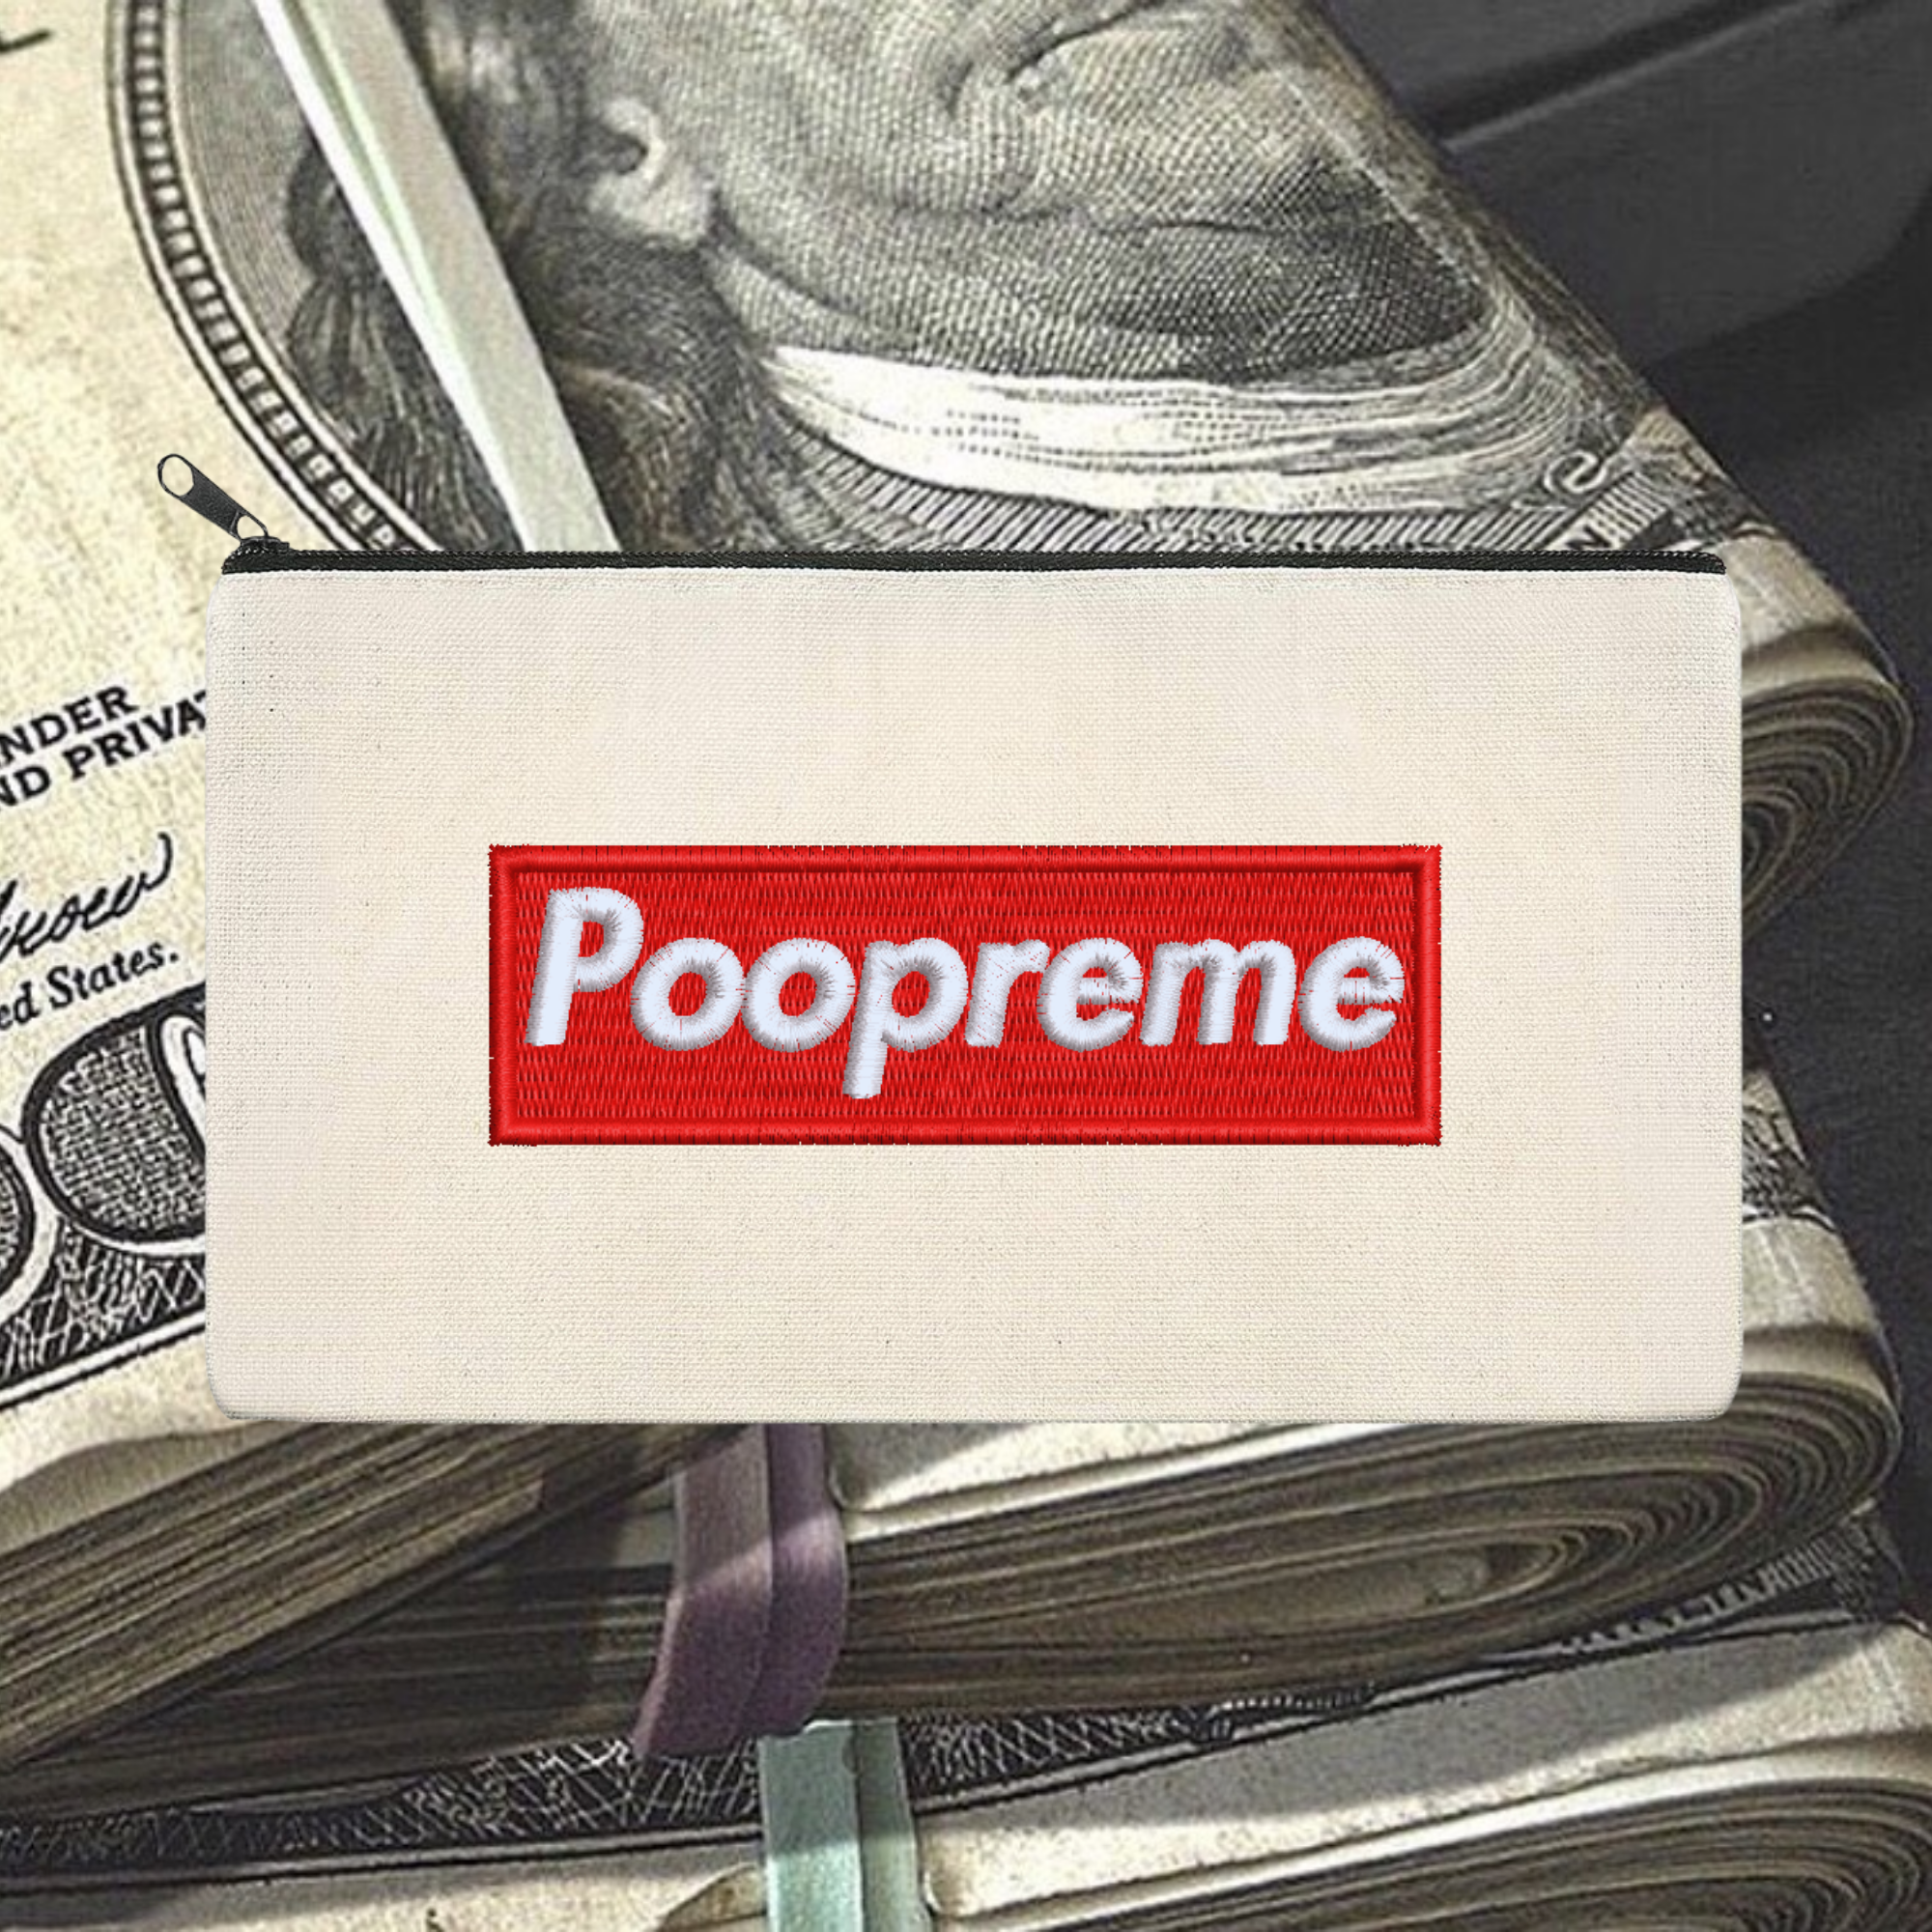 Poopreme Embroidered Multipurpose Zipper Pouch Bag